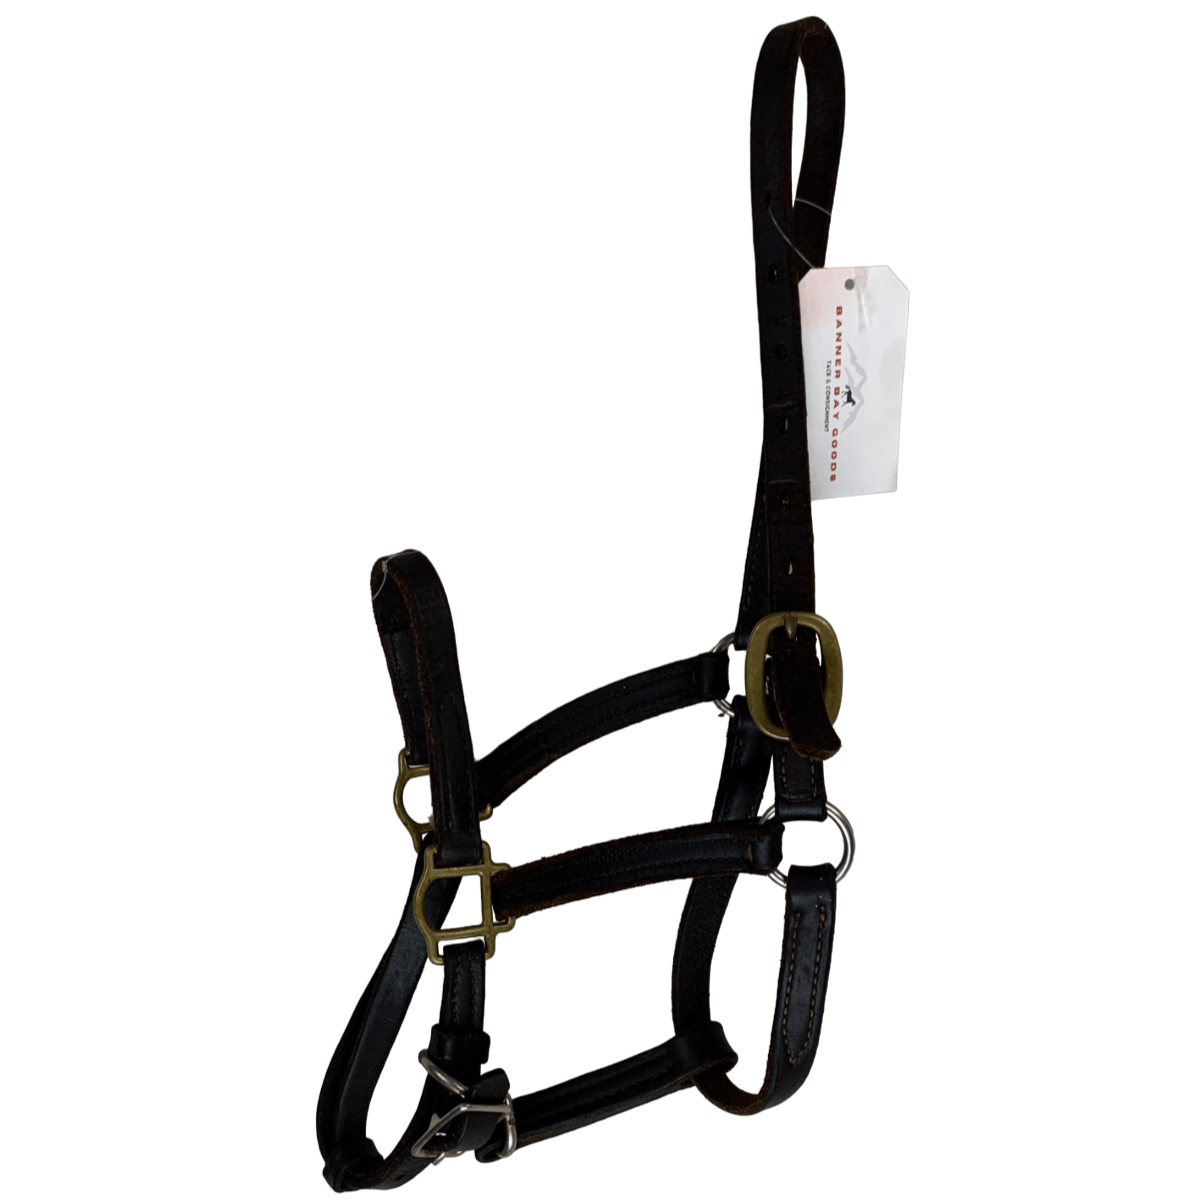 Weanling Leather Halter